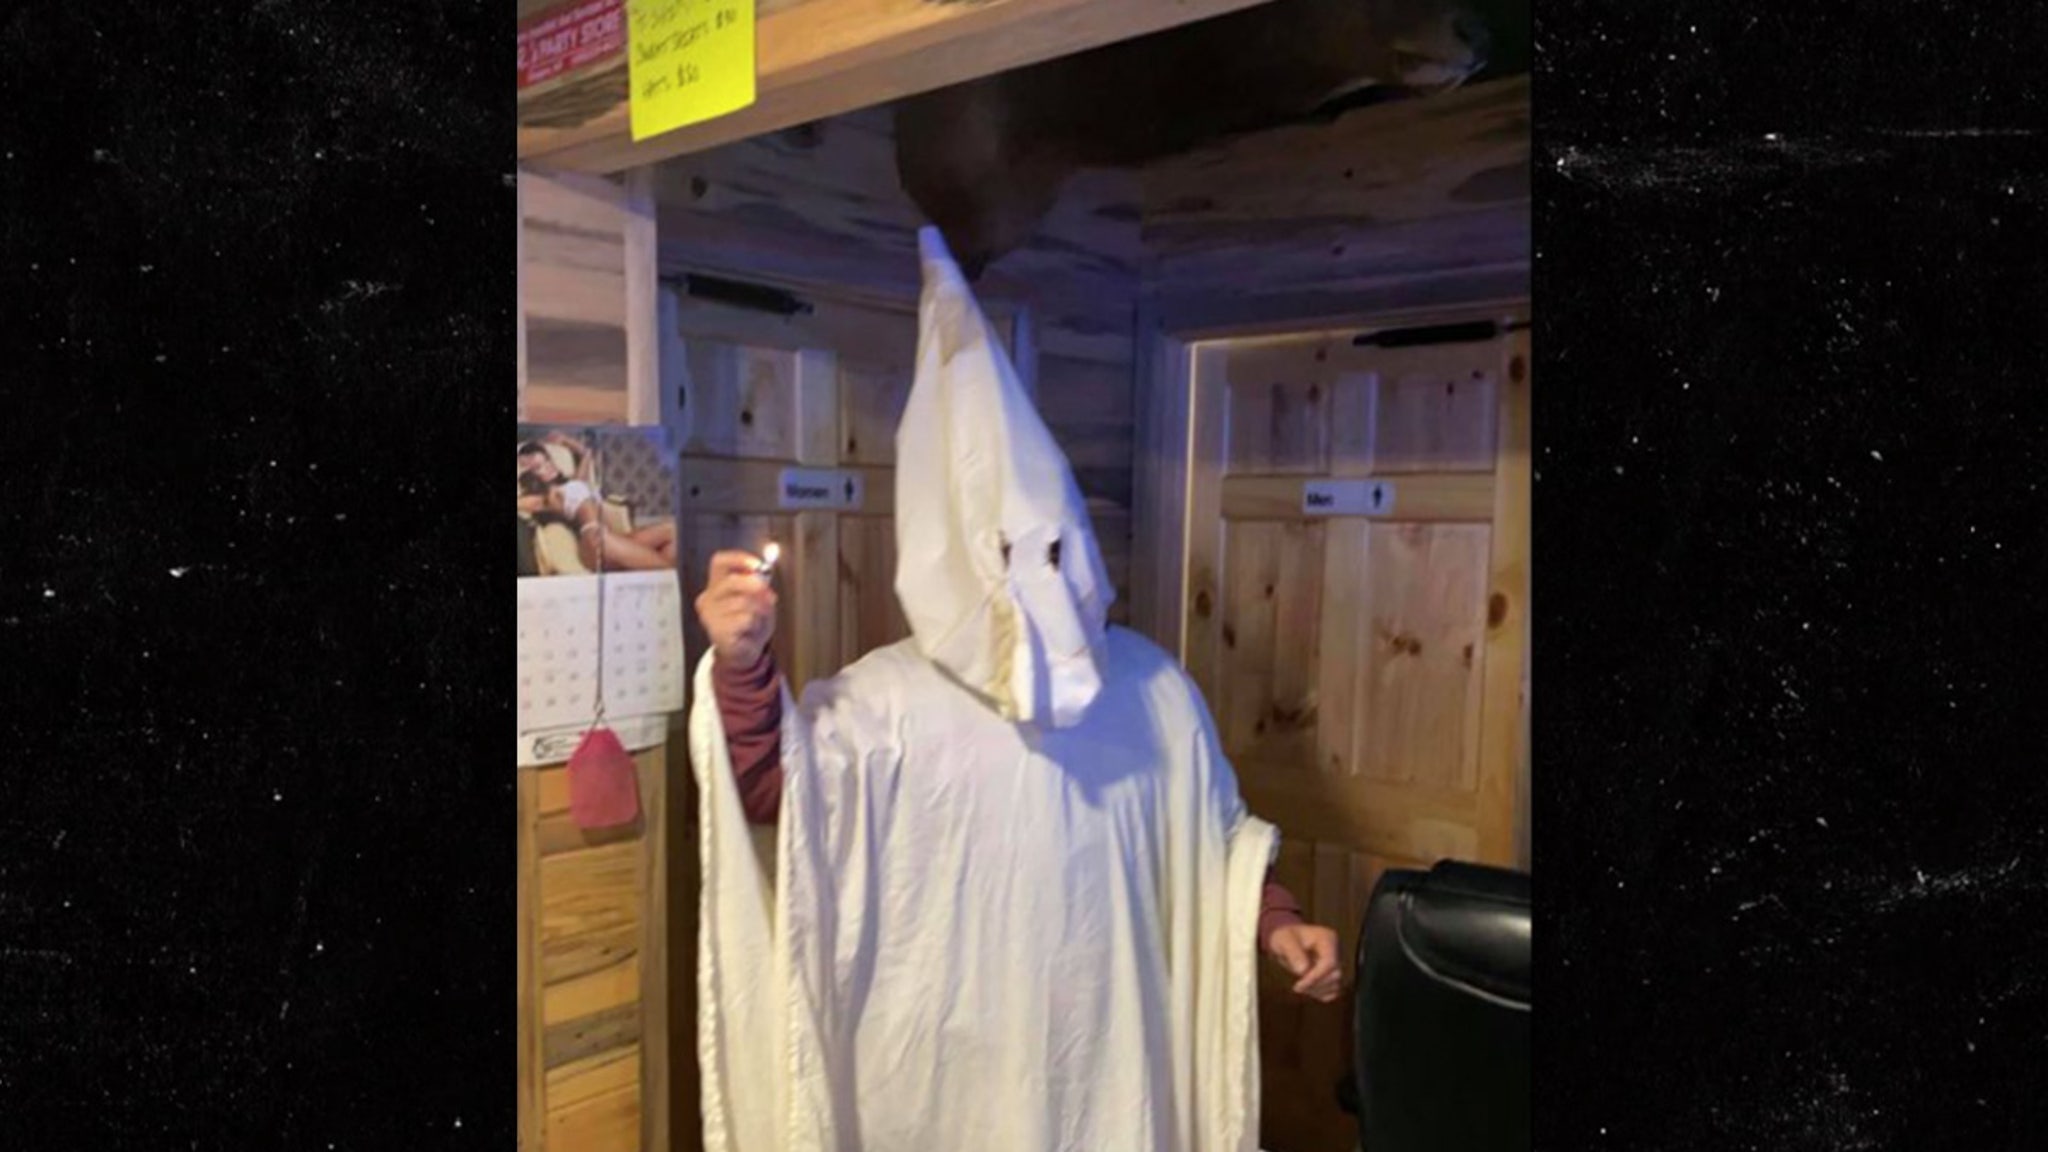 Montana Man in KKK Outfit Wins Costume Contest, He and Bar Apologize